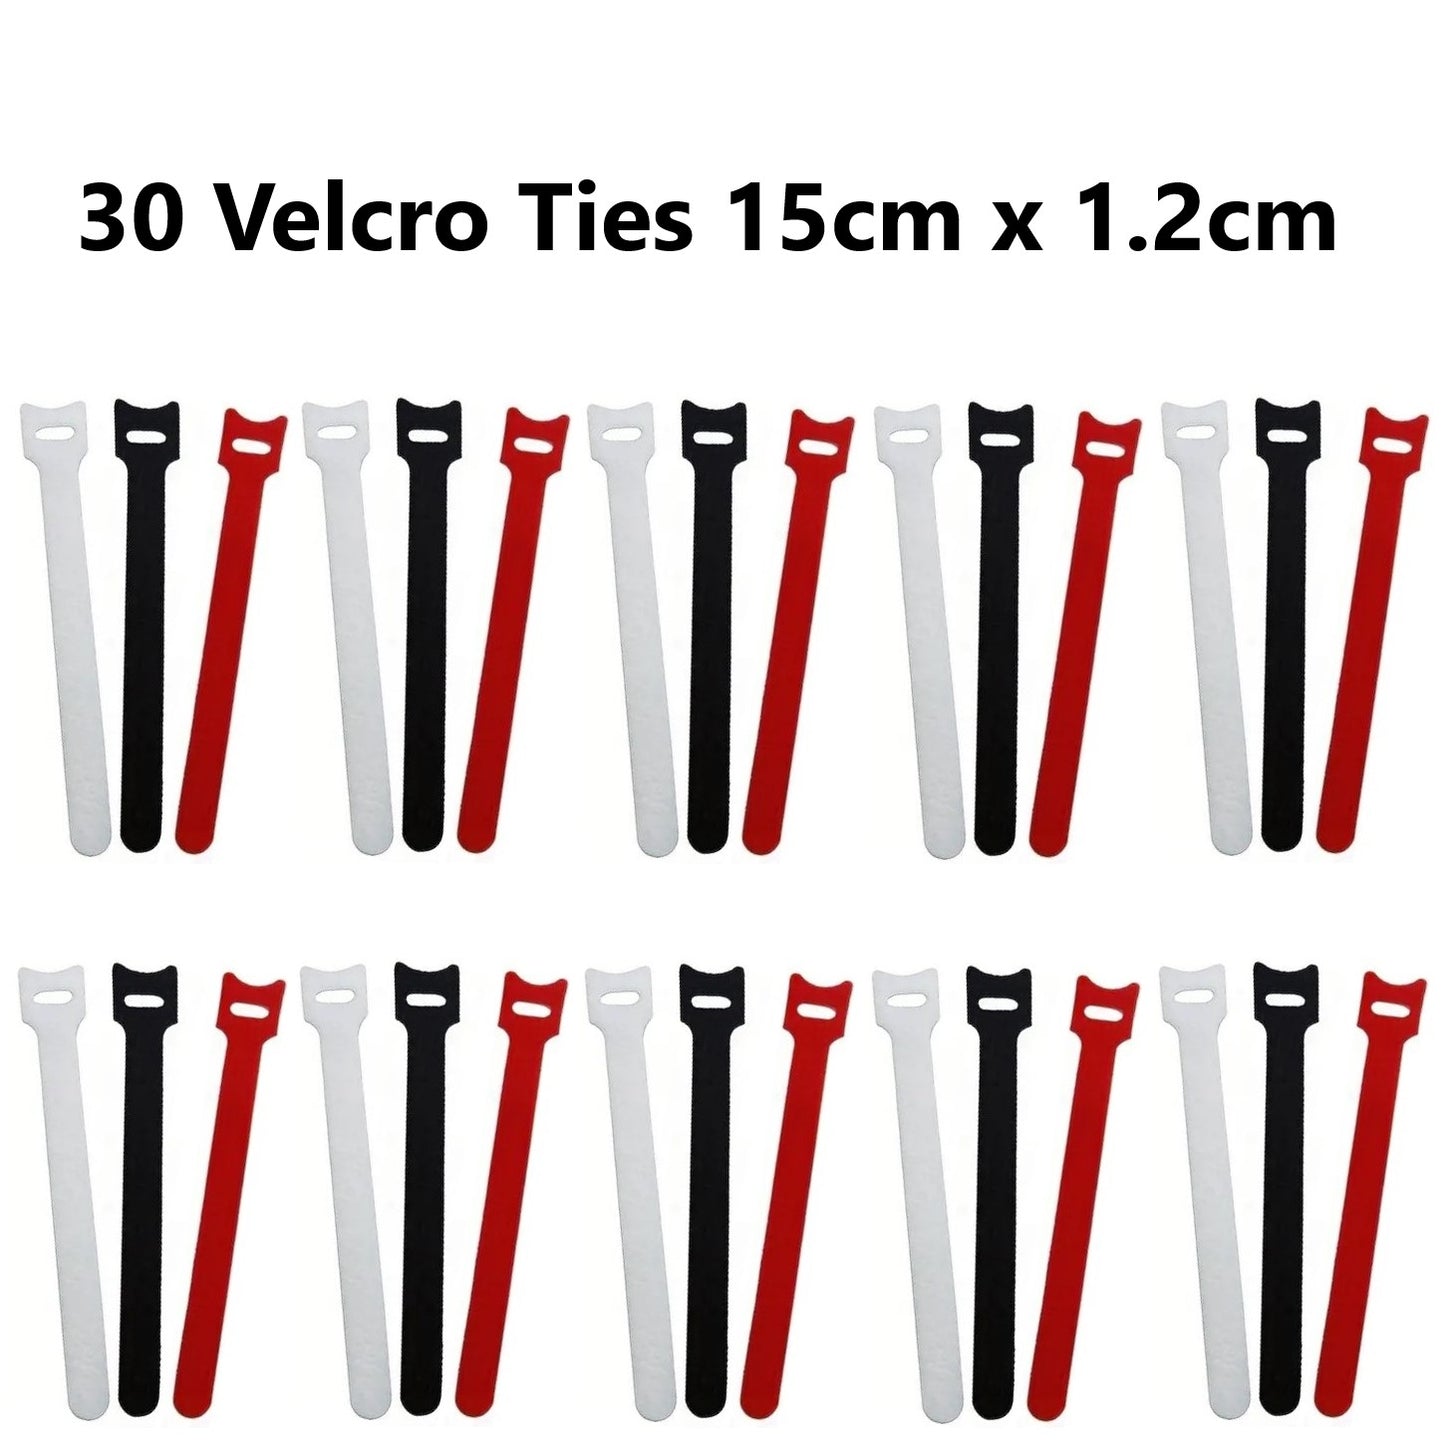 30 x Fastening Microfiber Cloth Cable Ties Reusable: Red, White, Black 15cm